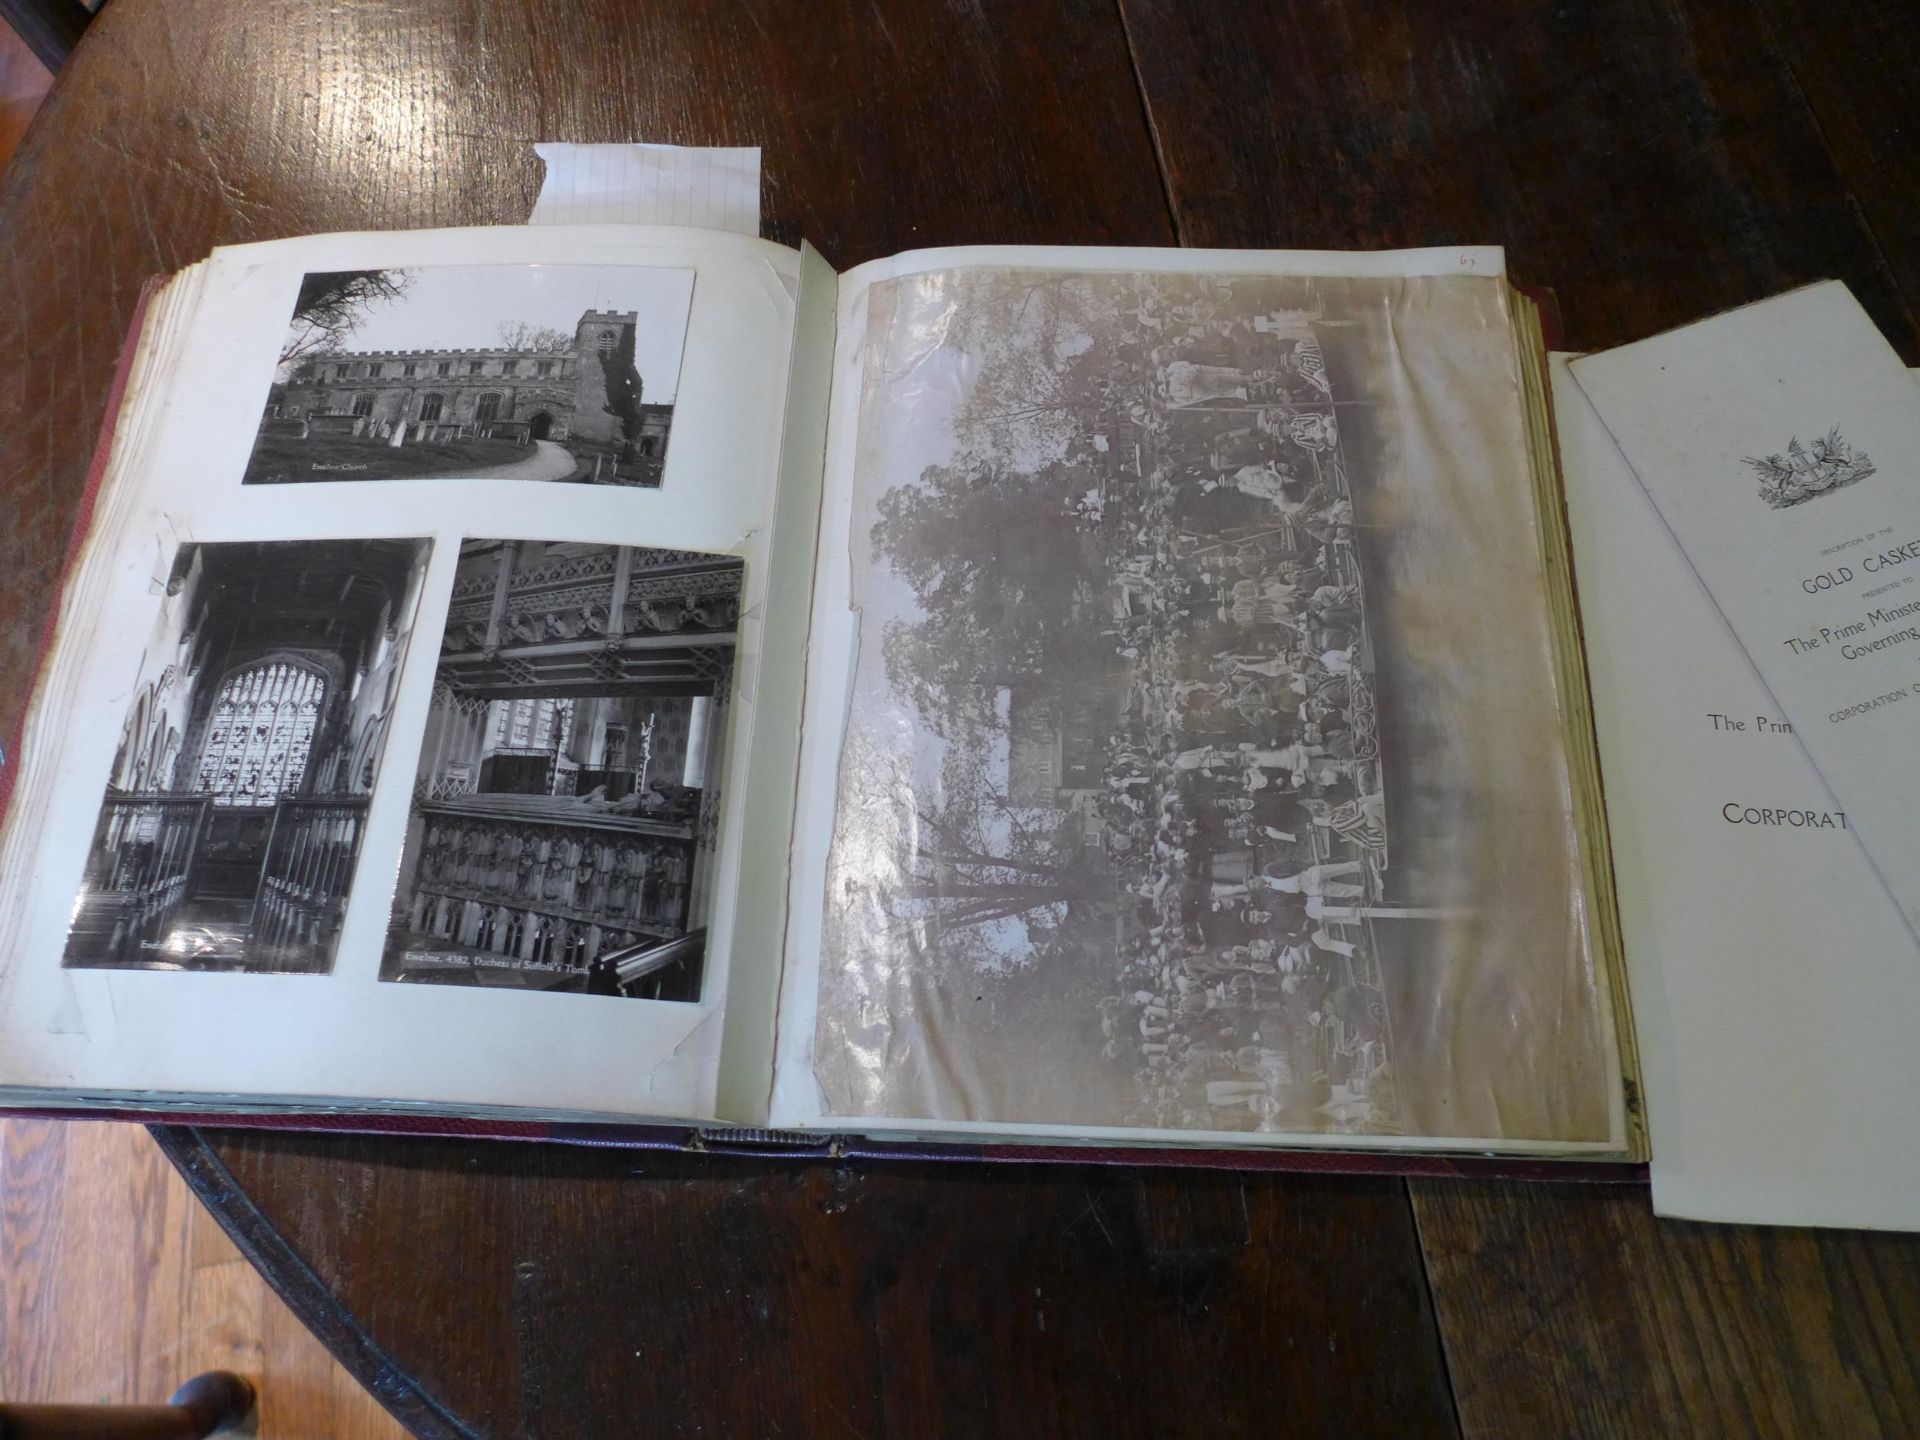 AN OLD PHOTO ALBUM WITH PHOTOS OF CATHEDRALS, HOUSES AND CASTLES ETC - Image 3 of 4